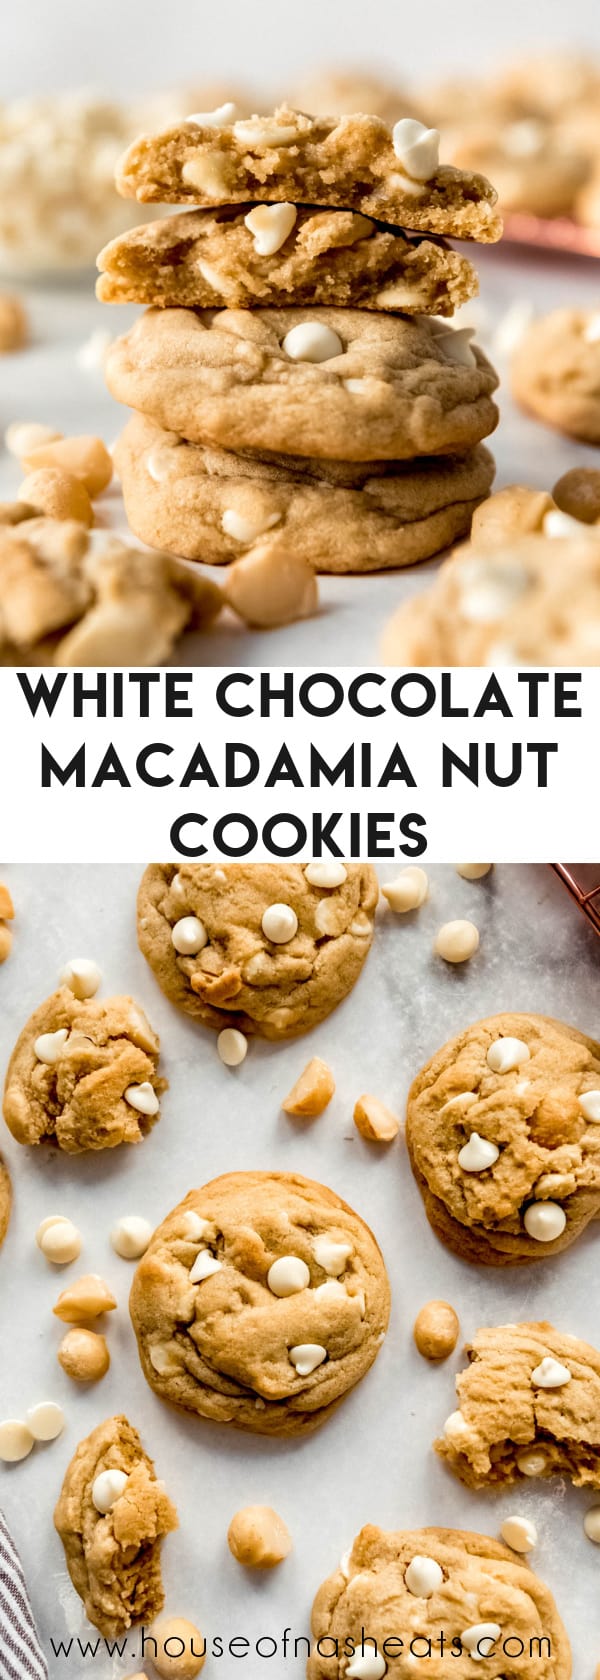 A collage of images of White chocolate macadamia nut cookies with text overlay.